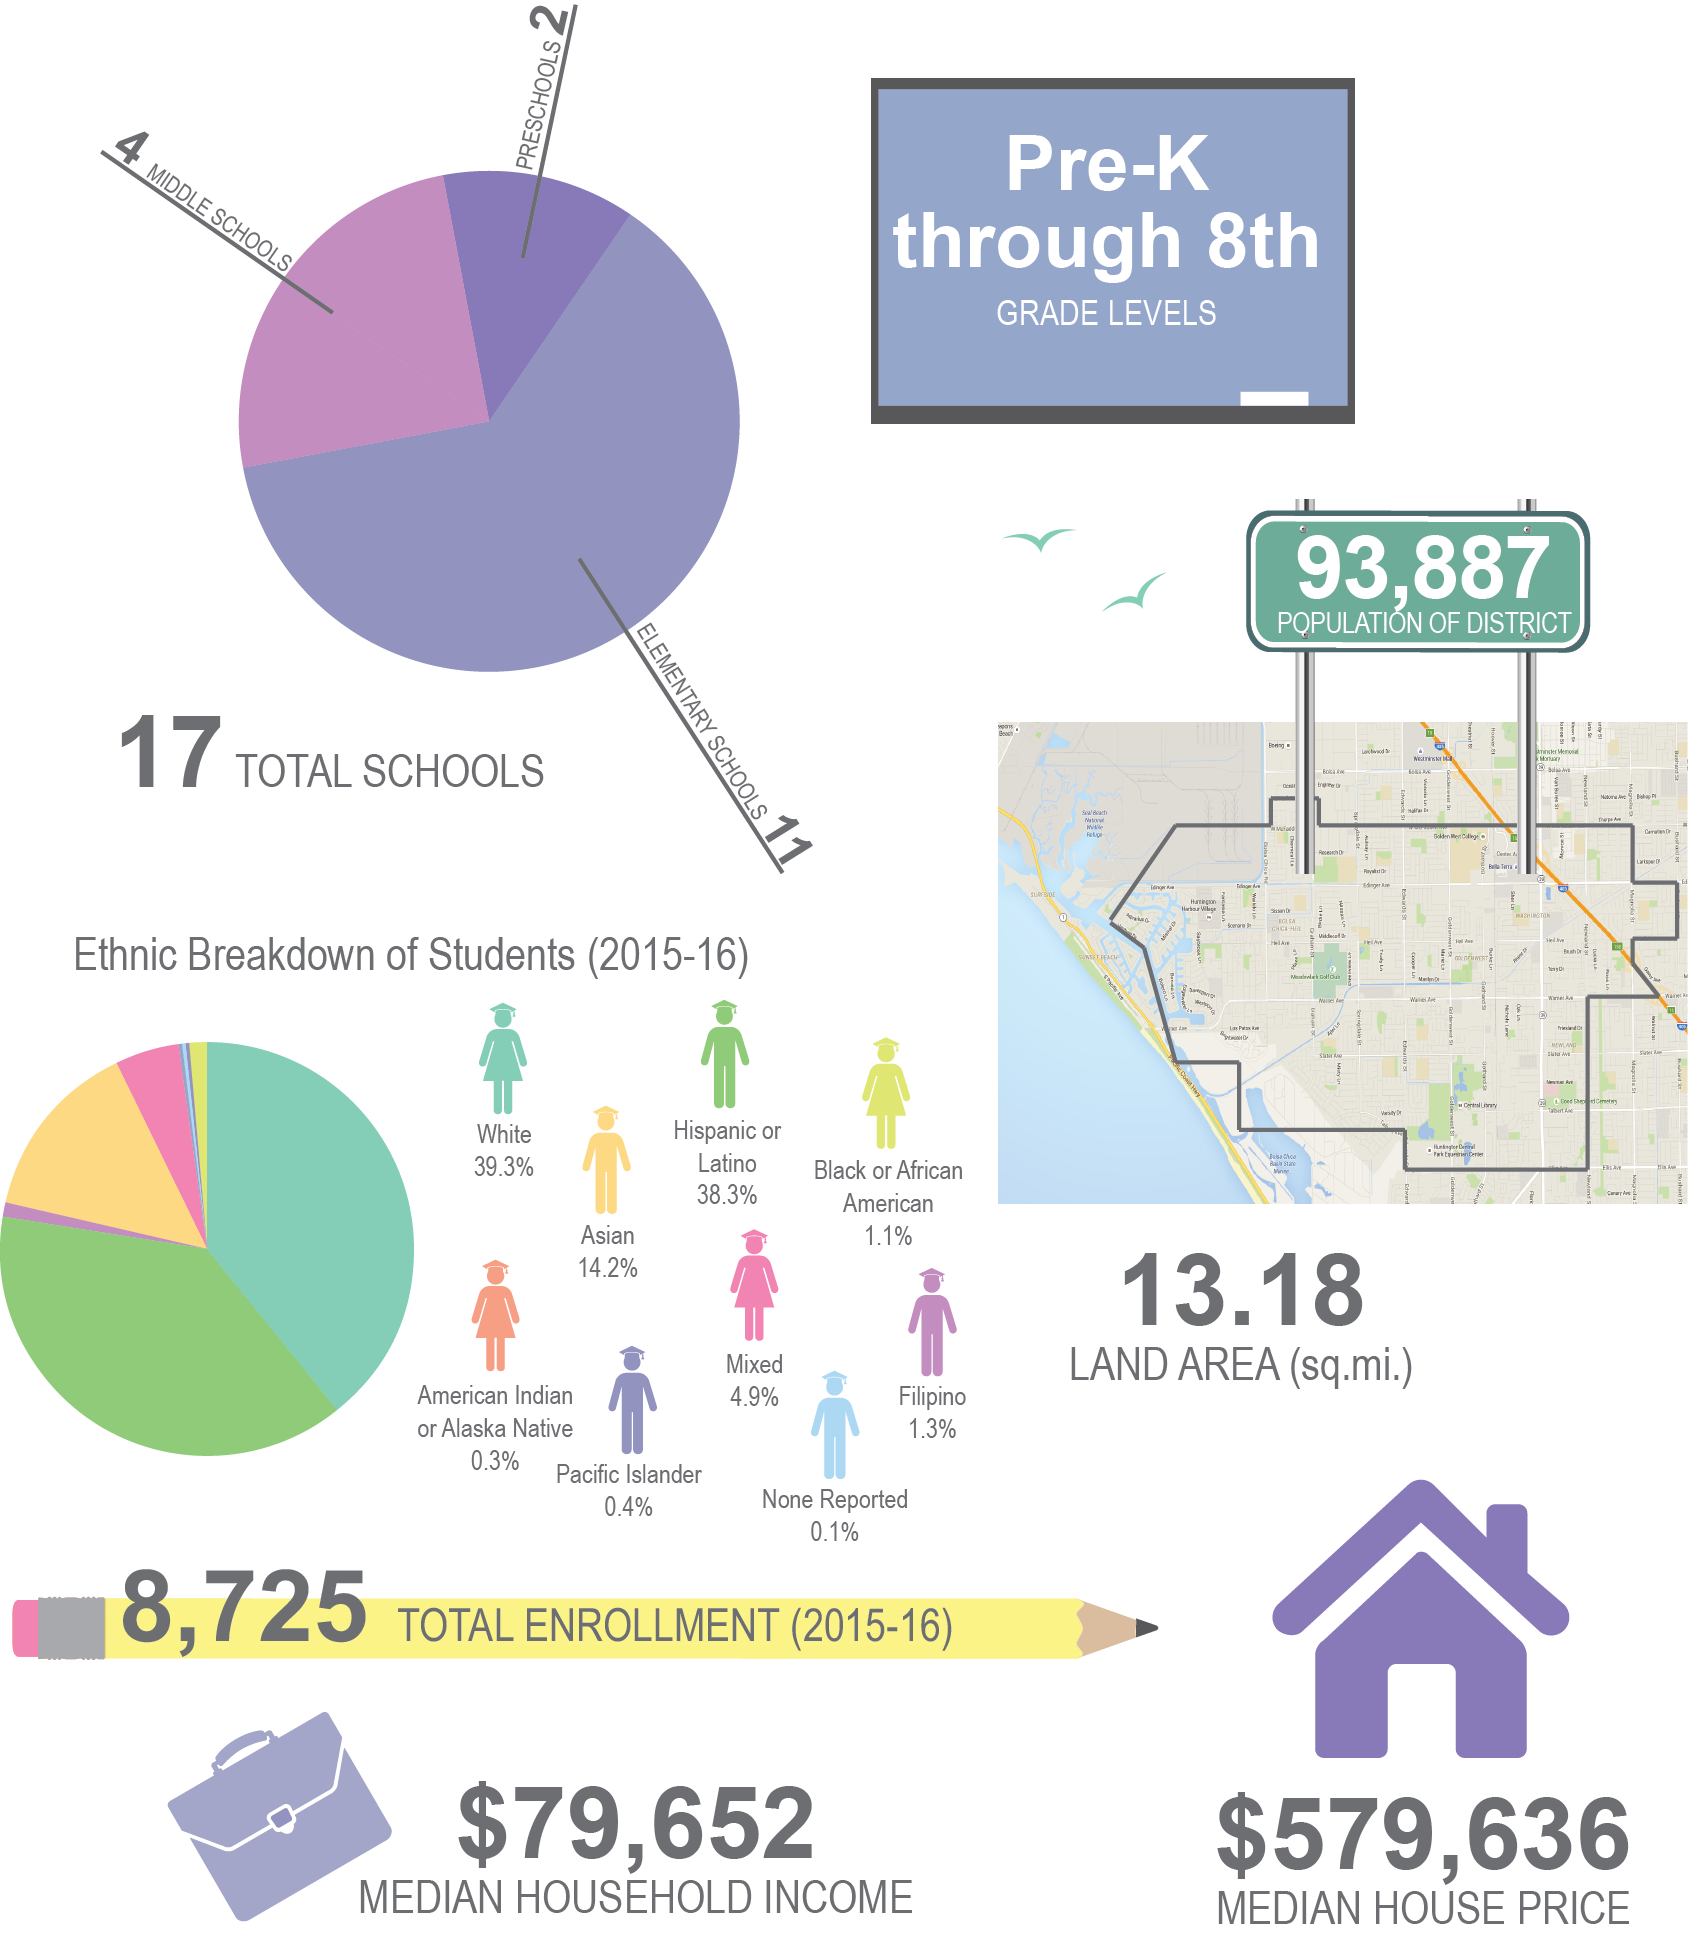 graphic showing overview data about the District